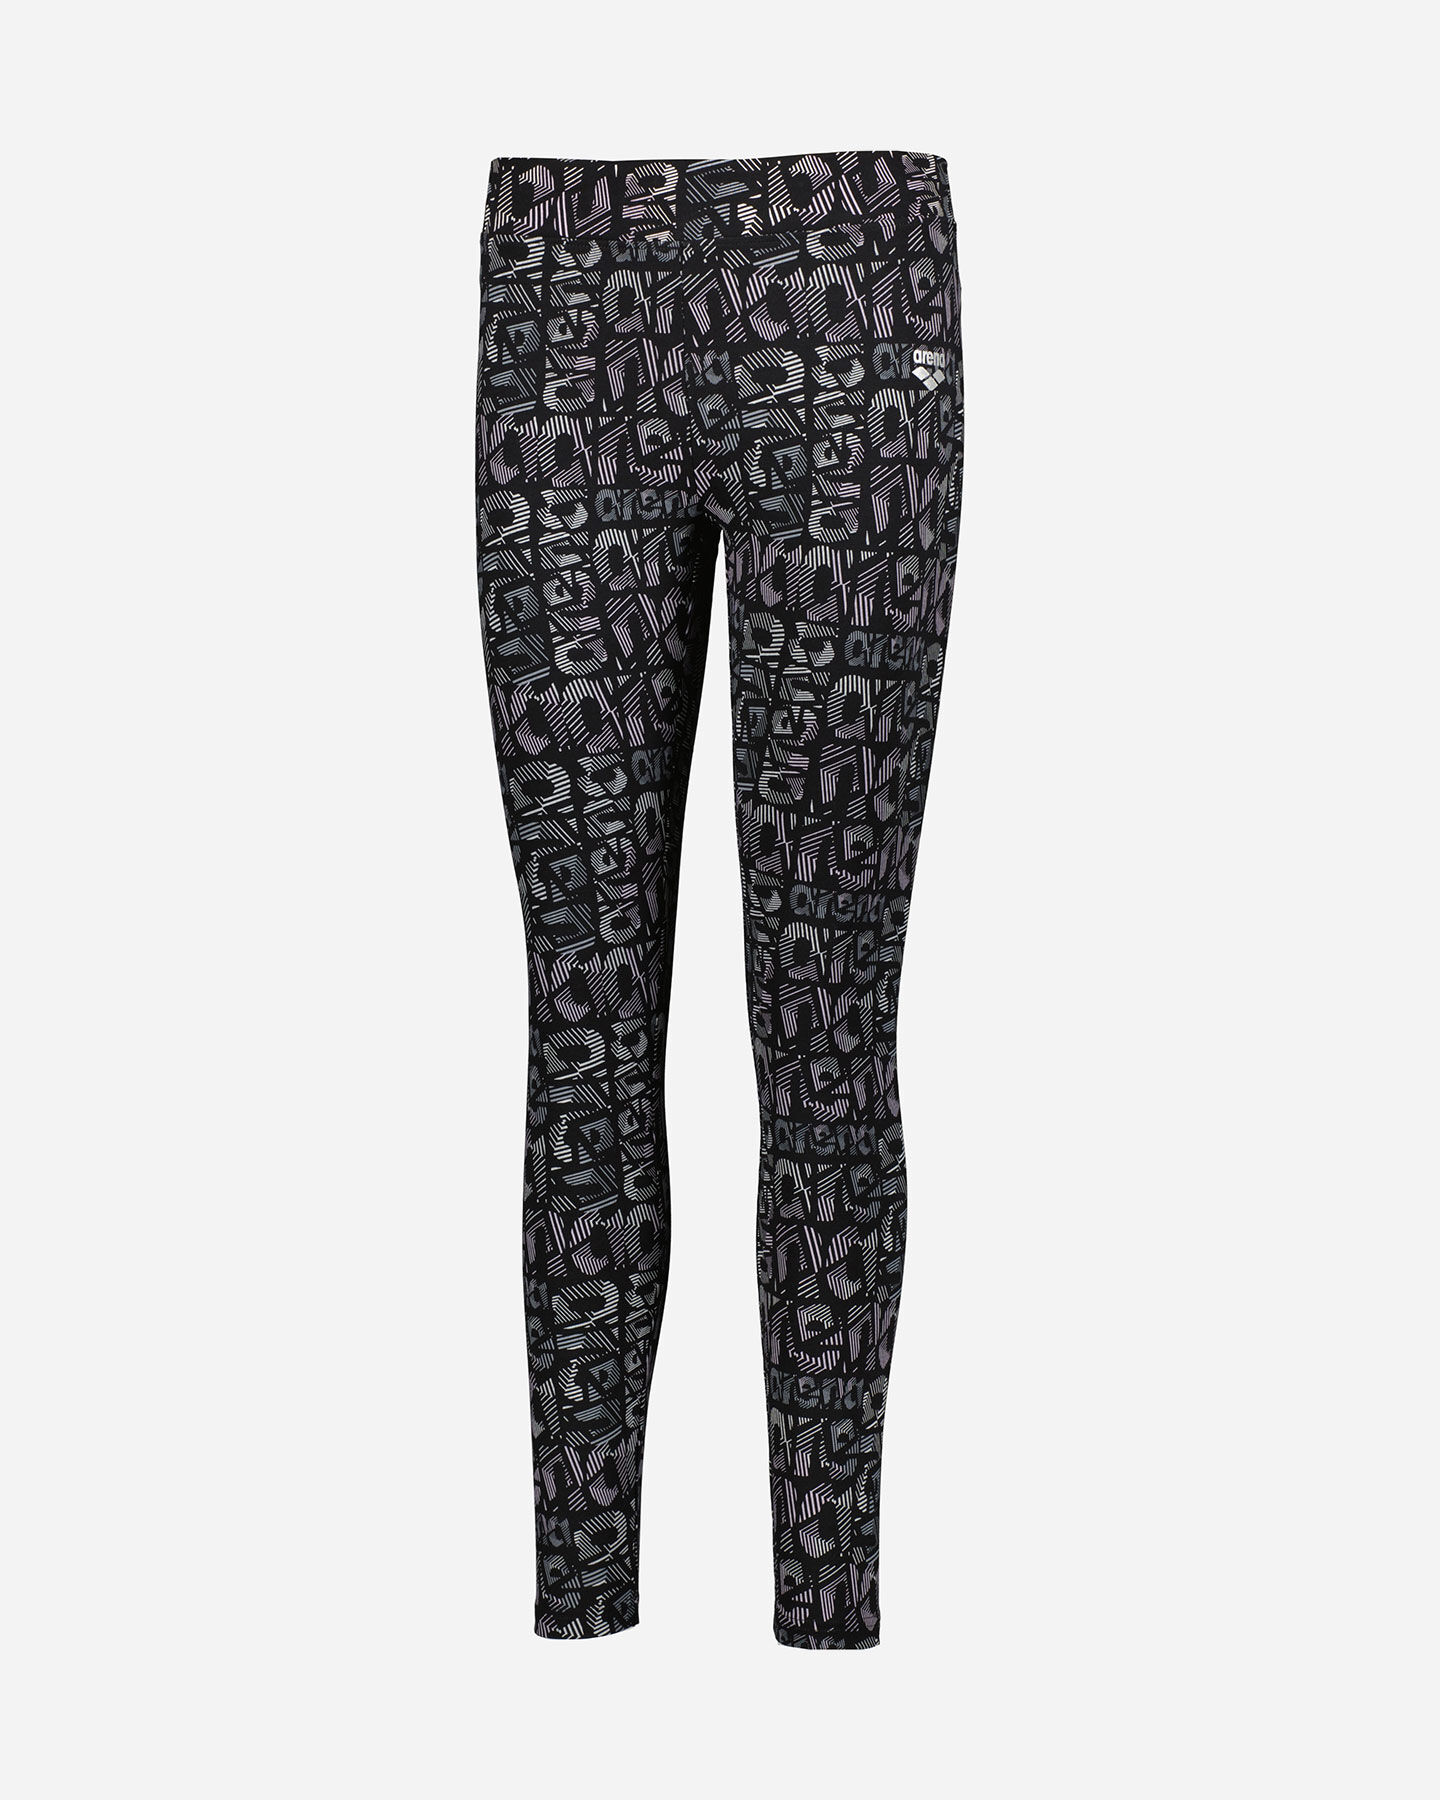  Leggings ARENA BASIC ATHLETICS LETTERS JSTRETCH W S4094338|AOP/050|S scatto 0